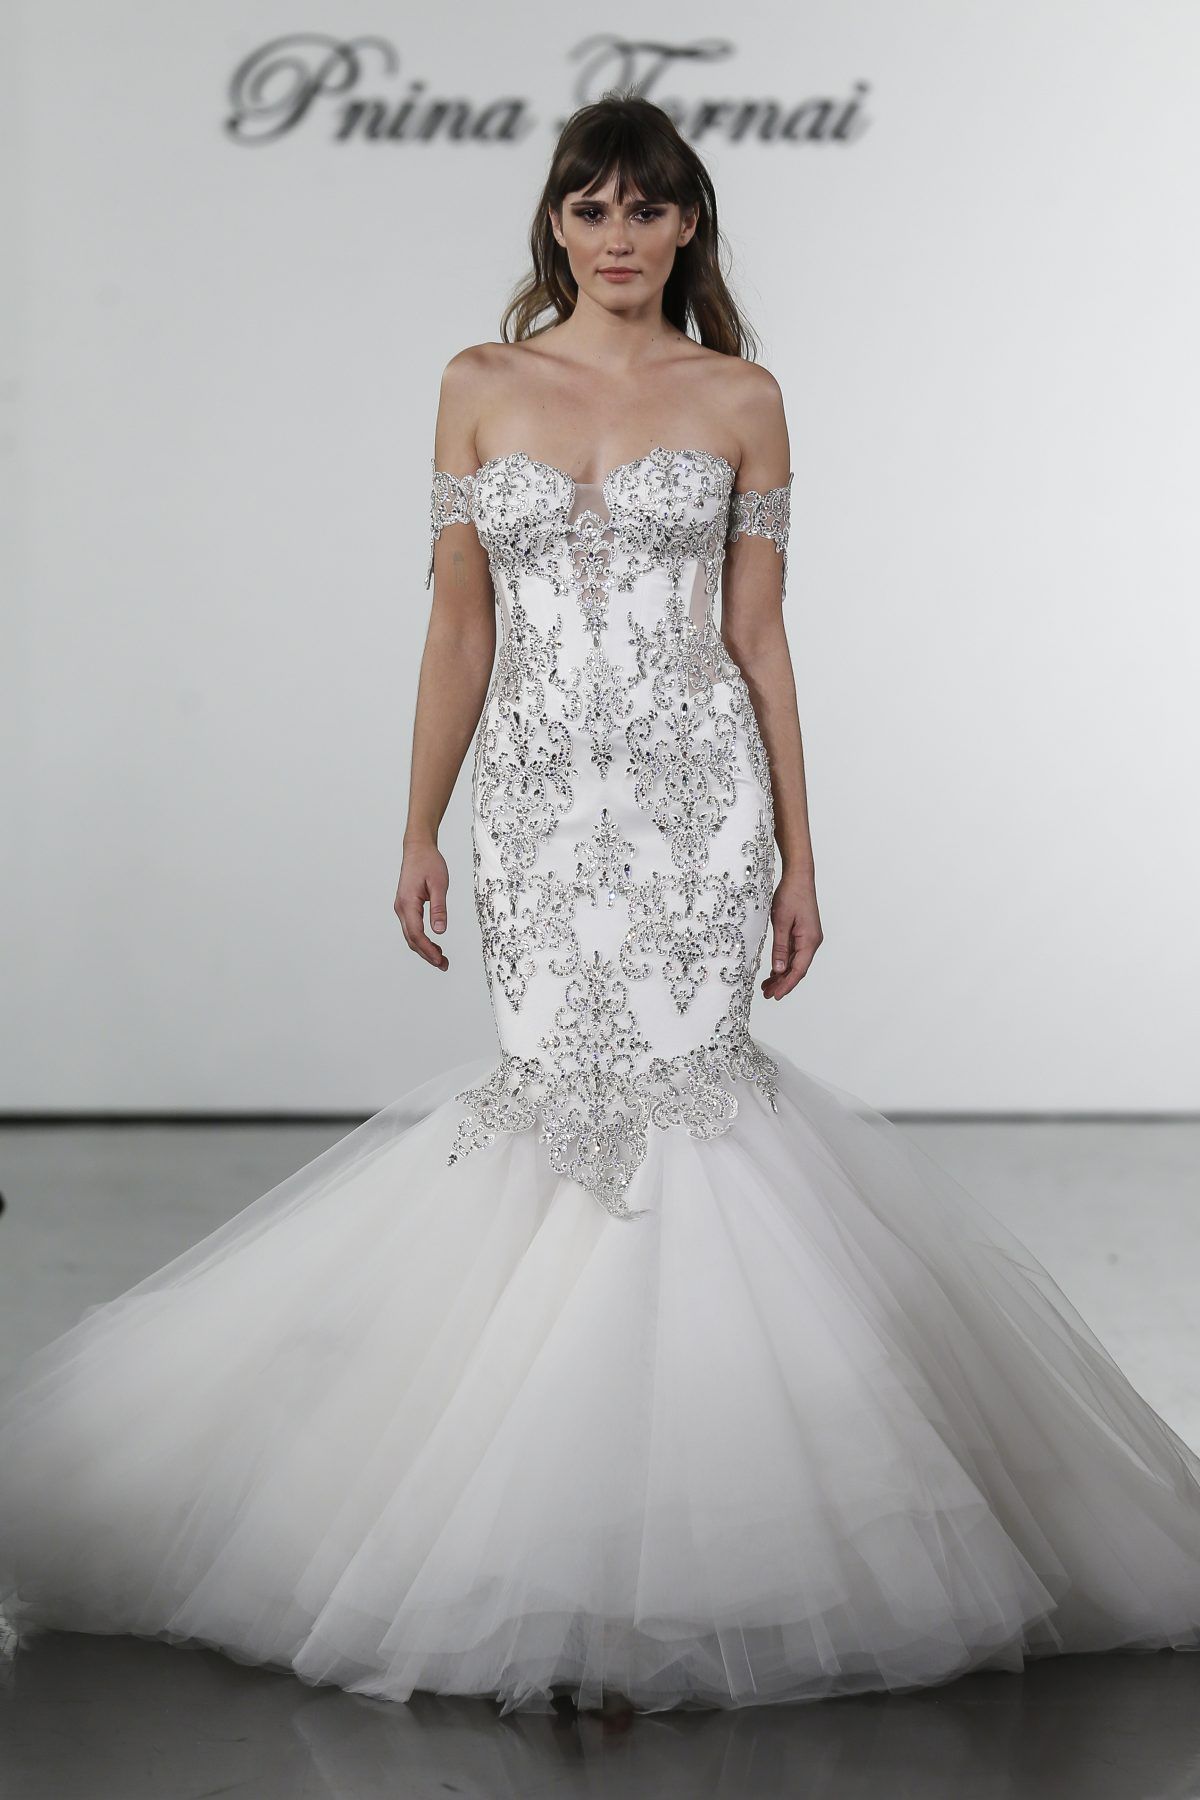 Great Most Popular Wedding Dress Designers of the decade Learn more here 